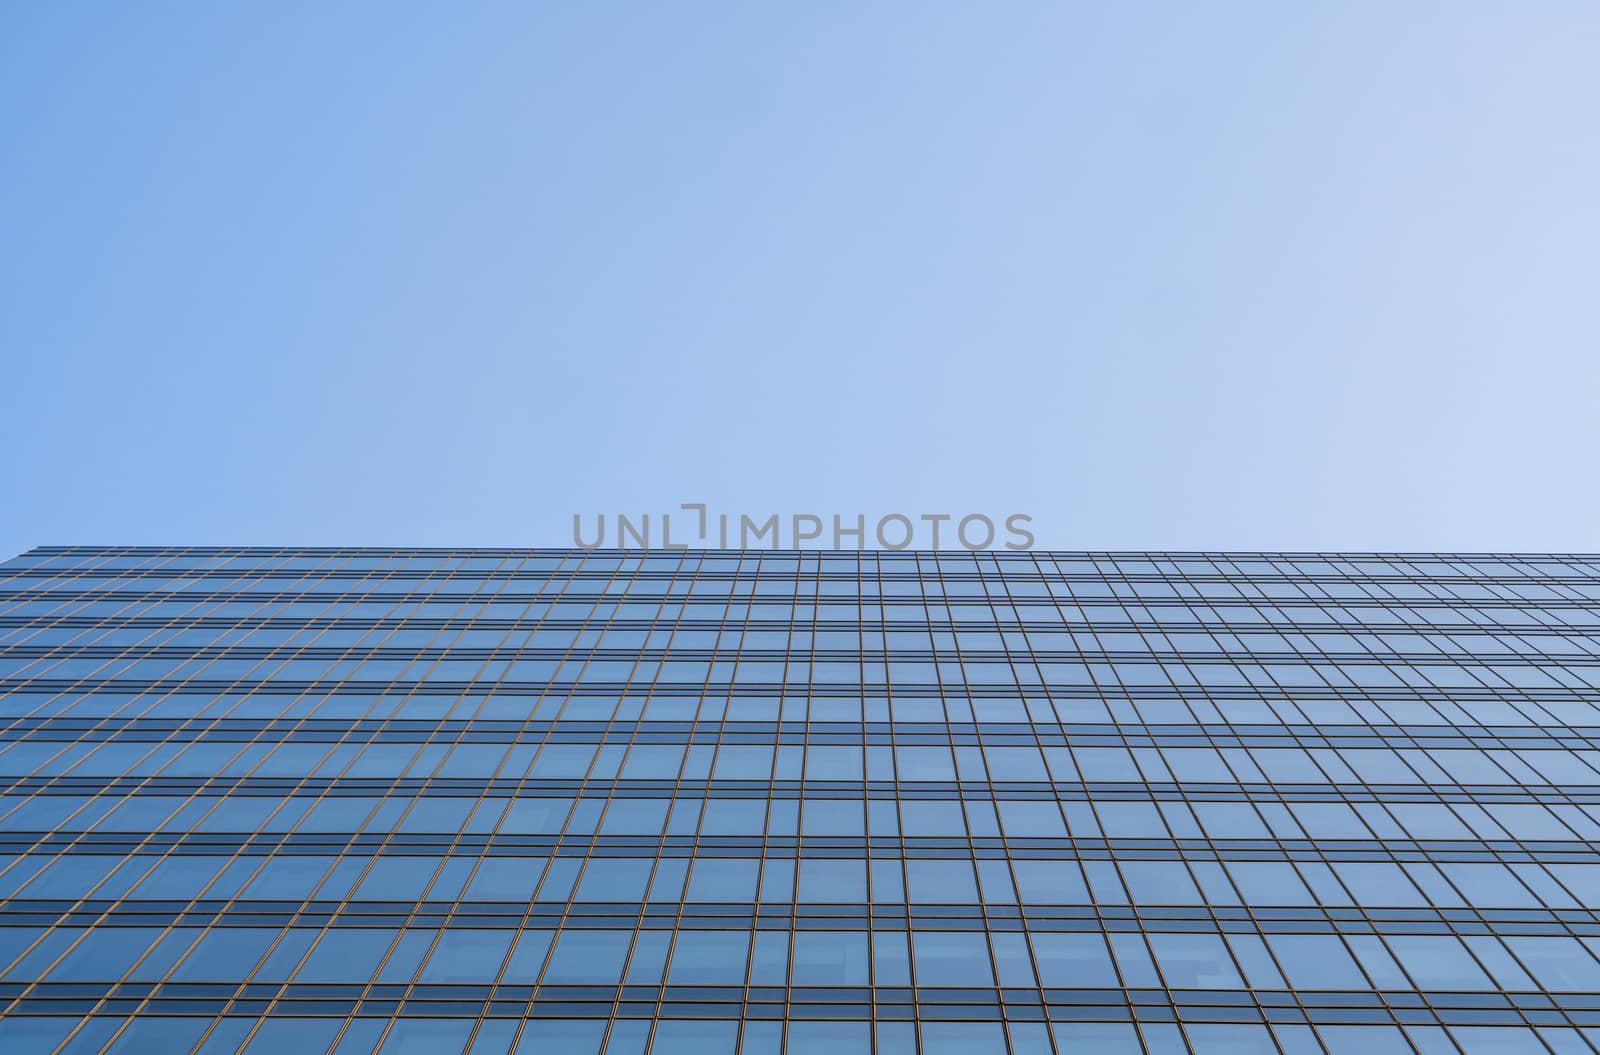 Reflection of the sky in the windows of a building. Perspective and underdite angle view to modern glass building skyscrapers over blue sky. Windows of Bussiness office or corporate building